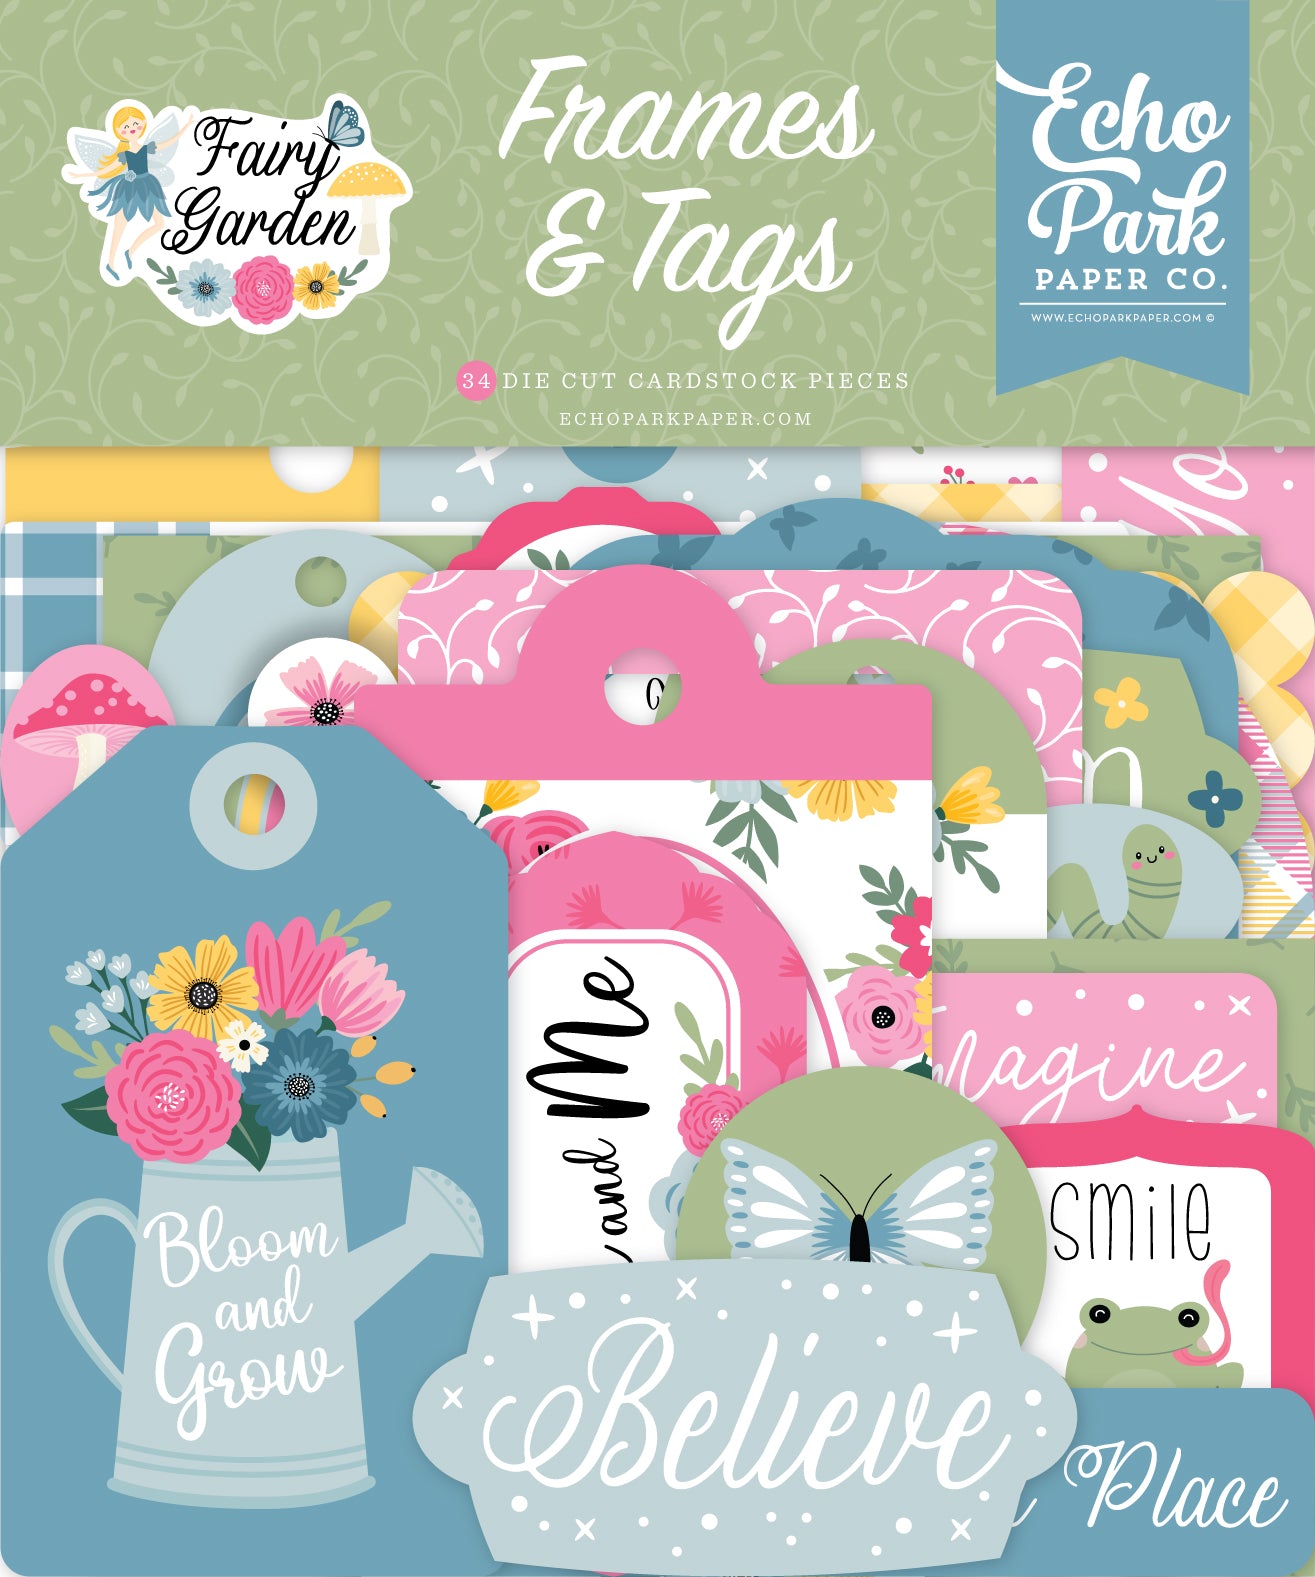 Fairy Garden Collection 5 x 5 Scrapbook Frames & Tags by Echo Park Paper